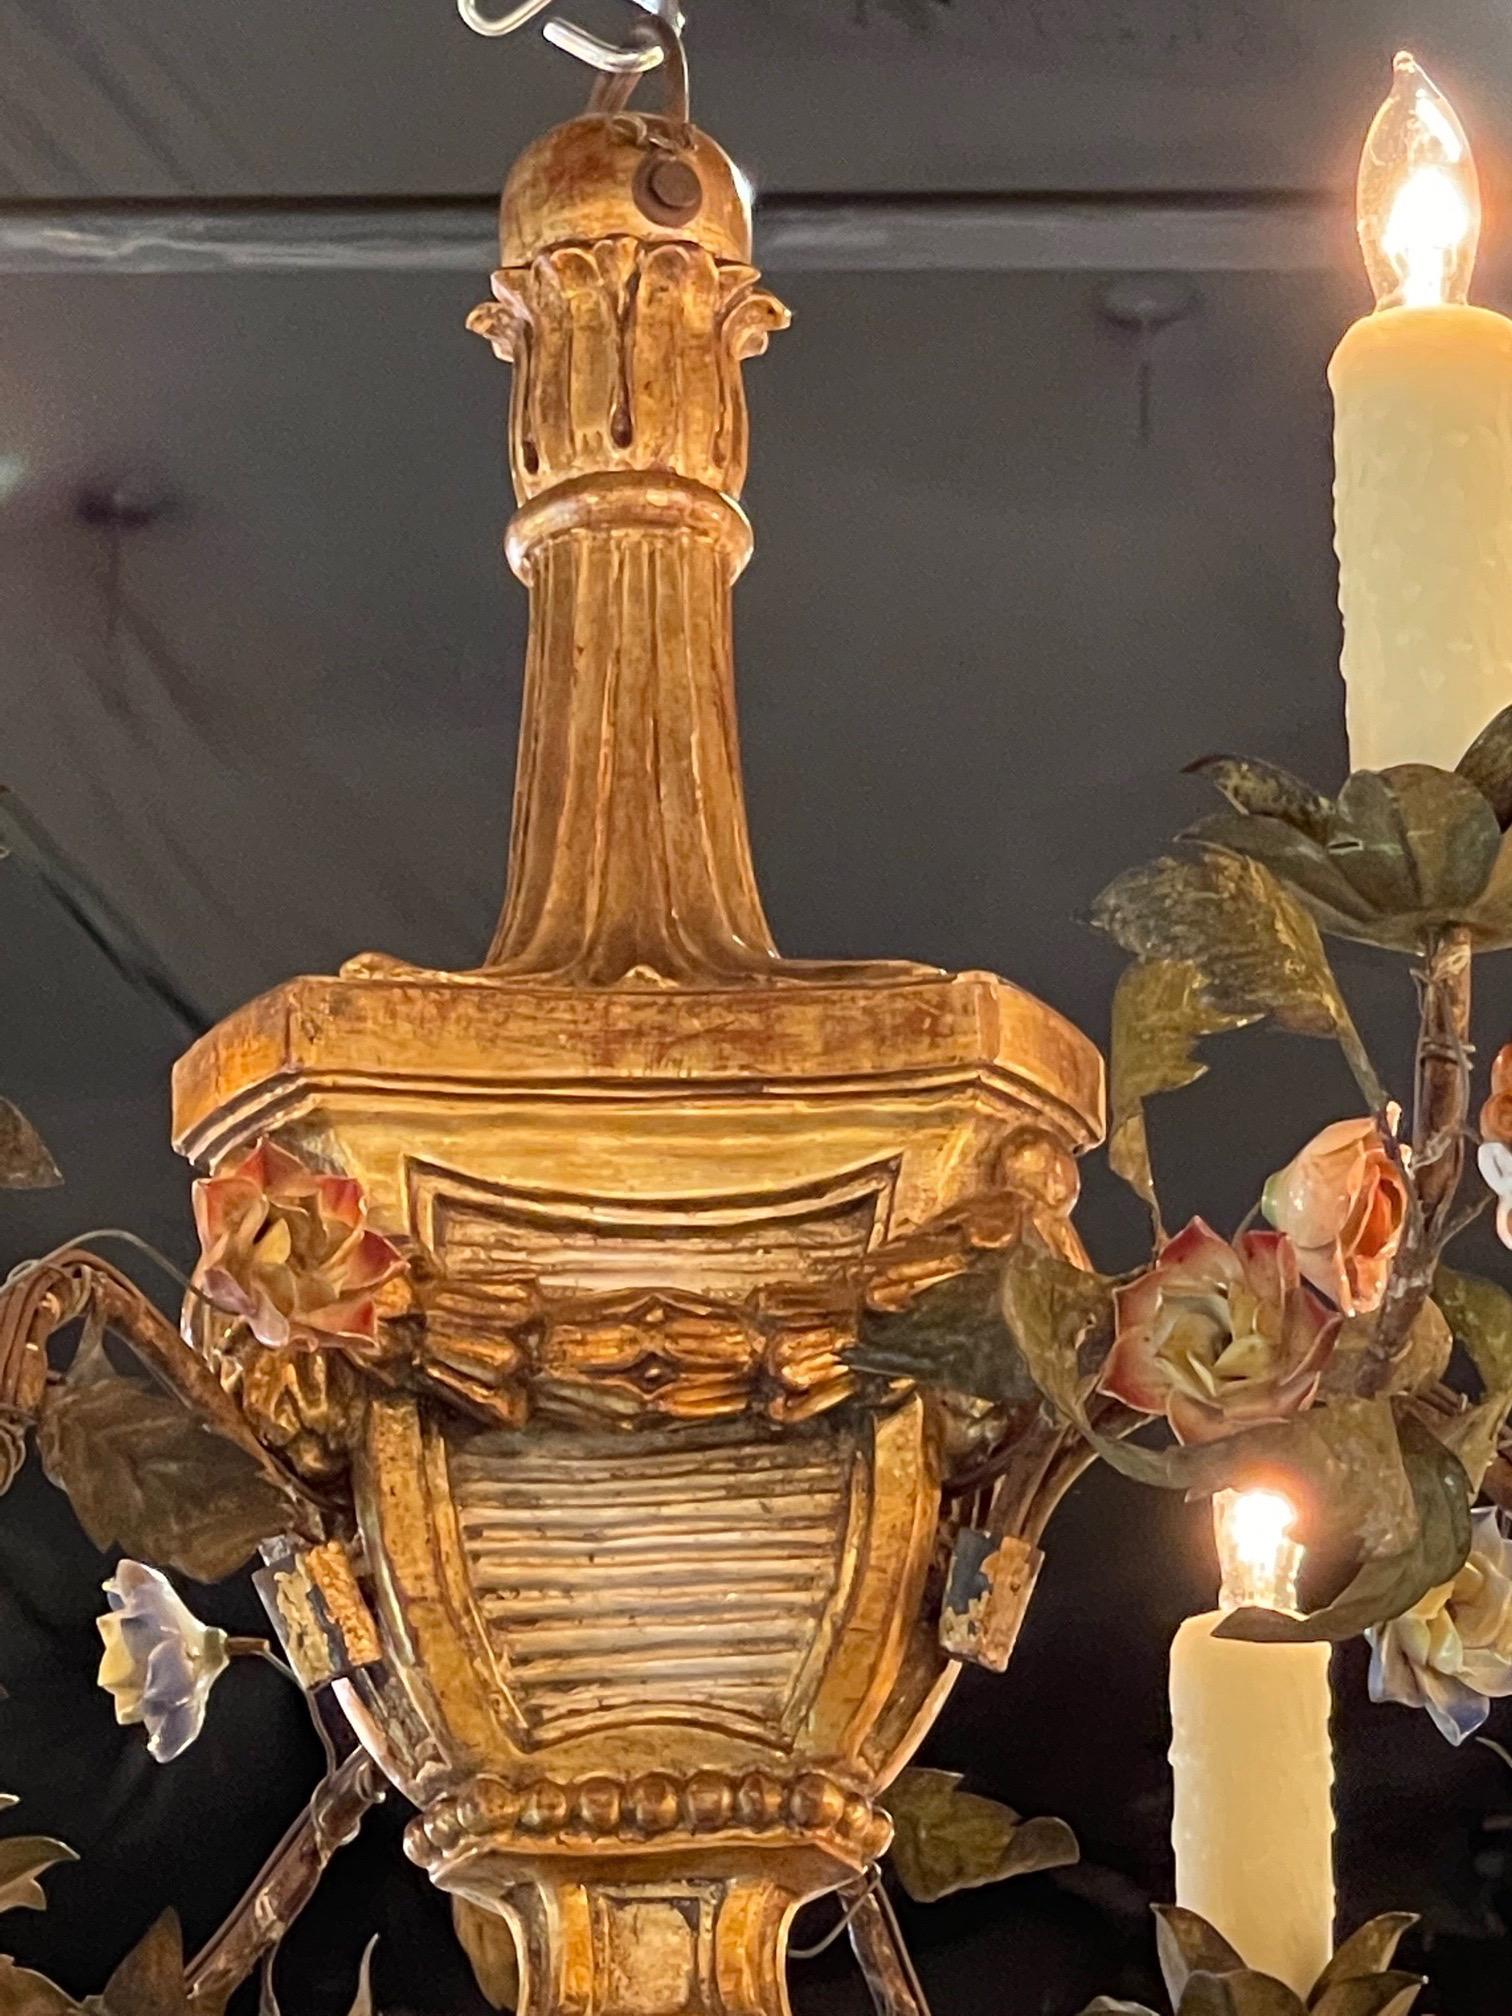 Lovely 19th century carved Italian giltwood and iron chandelier with porcelain flowers of pink, white and blue. The fixture has 6 lights and a beautifully carved base as well. Very unique!!